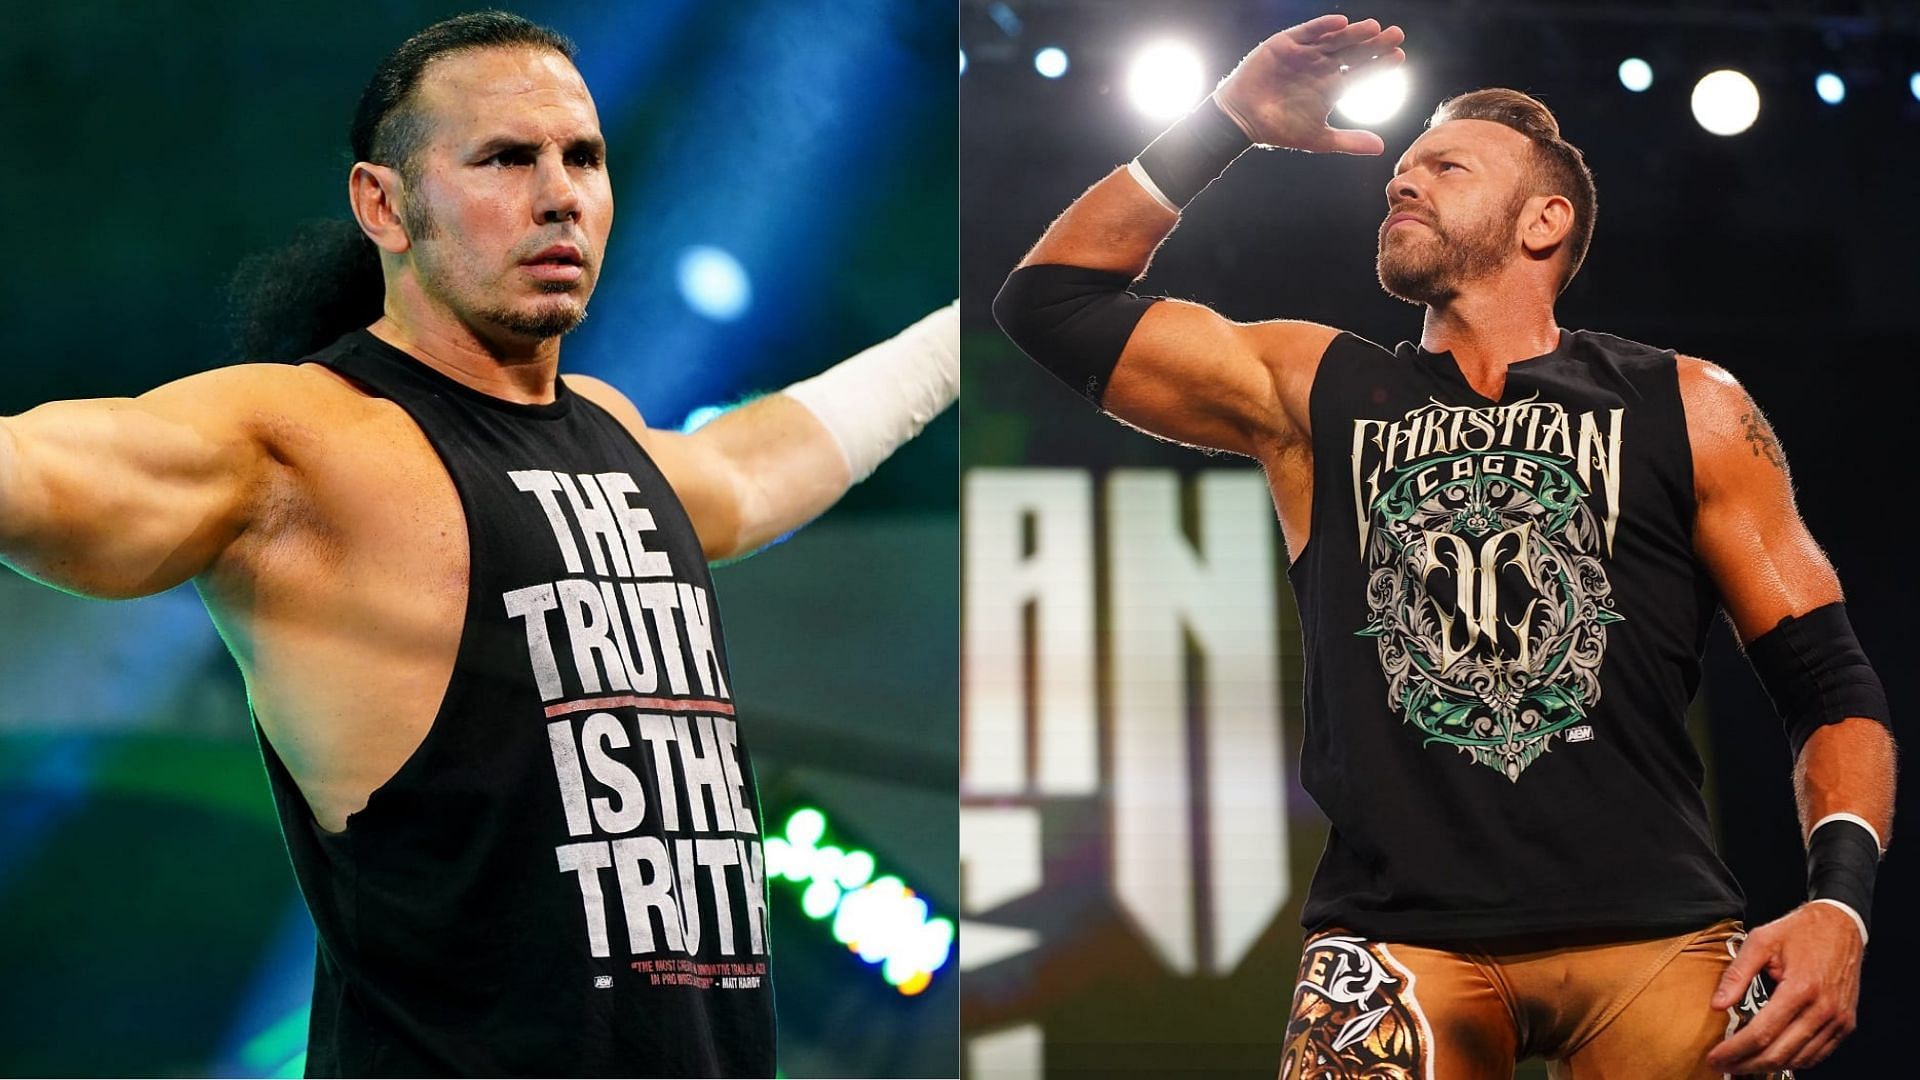 Matt Hardy (left) and Christian (right) are former WWE Superstars in AEW